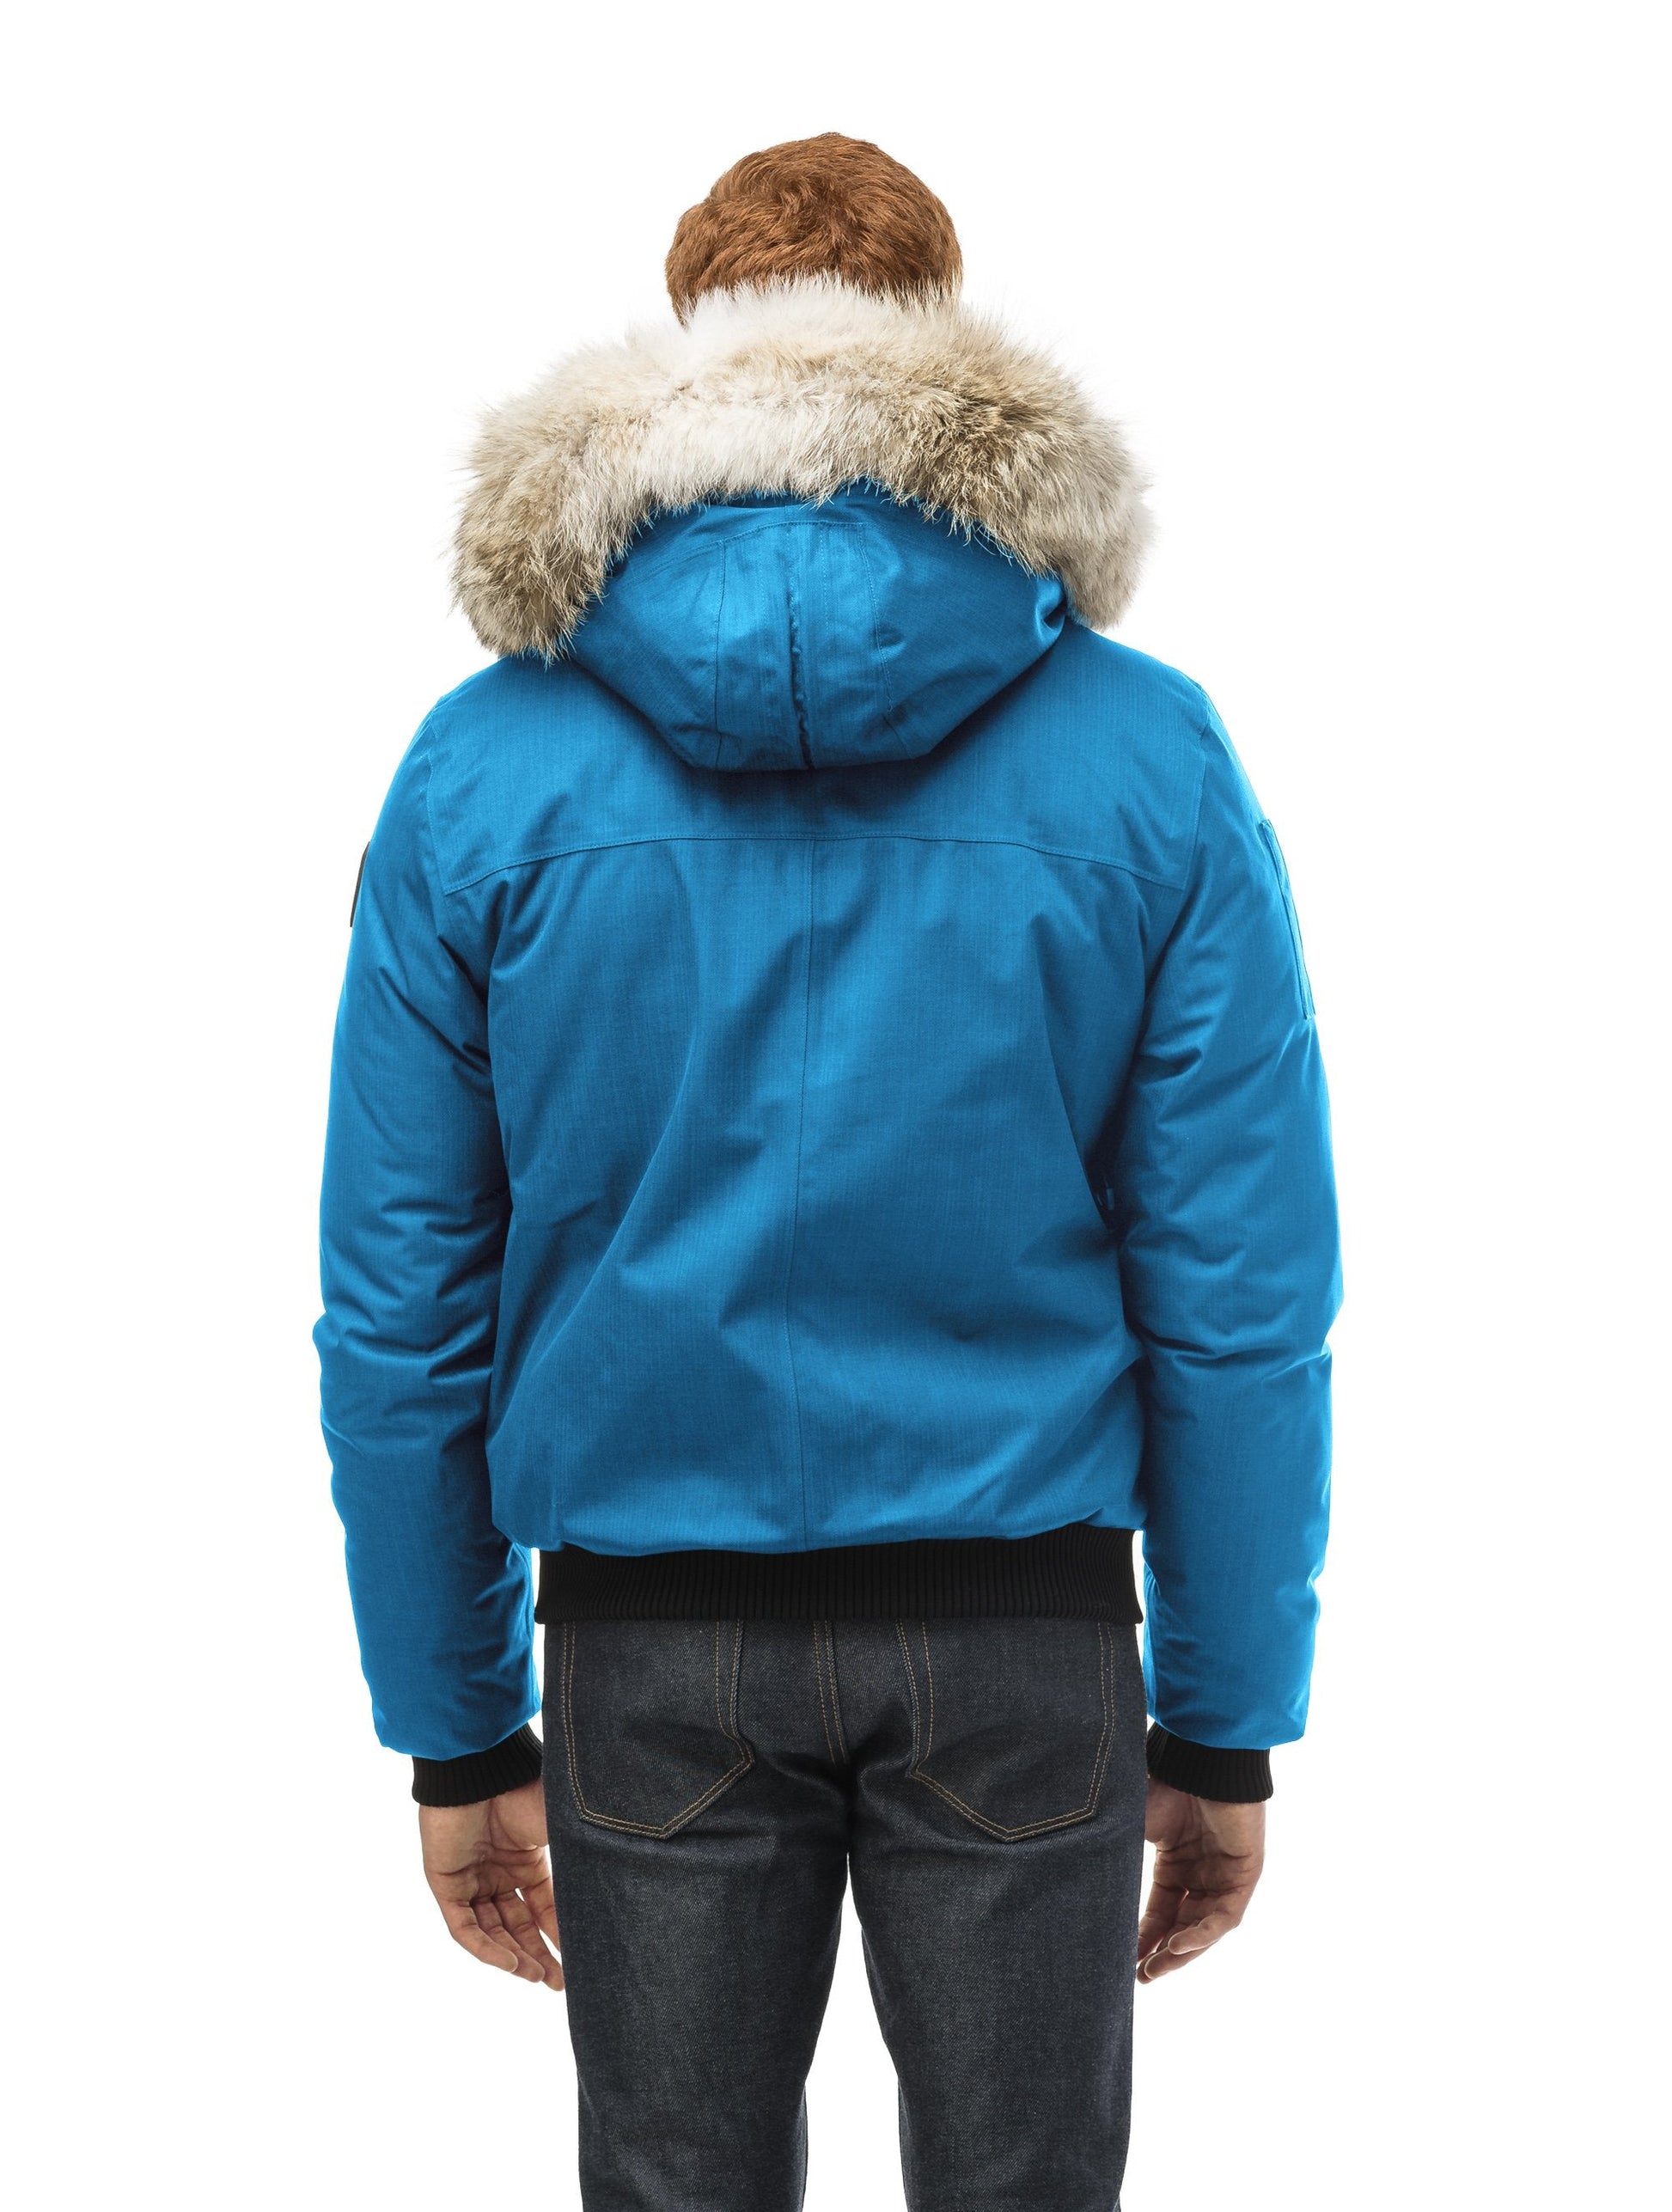 Men's classic down filled bomber jacket with a down filled hood that features a removable coyote fur trim and concealed moldable framing wire in Sea Blue